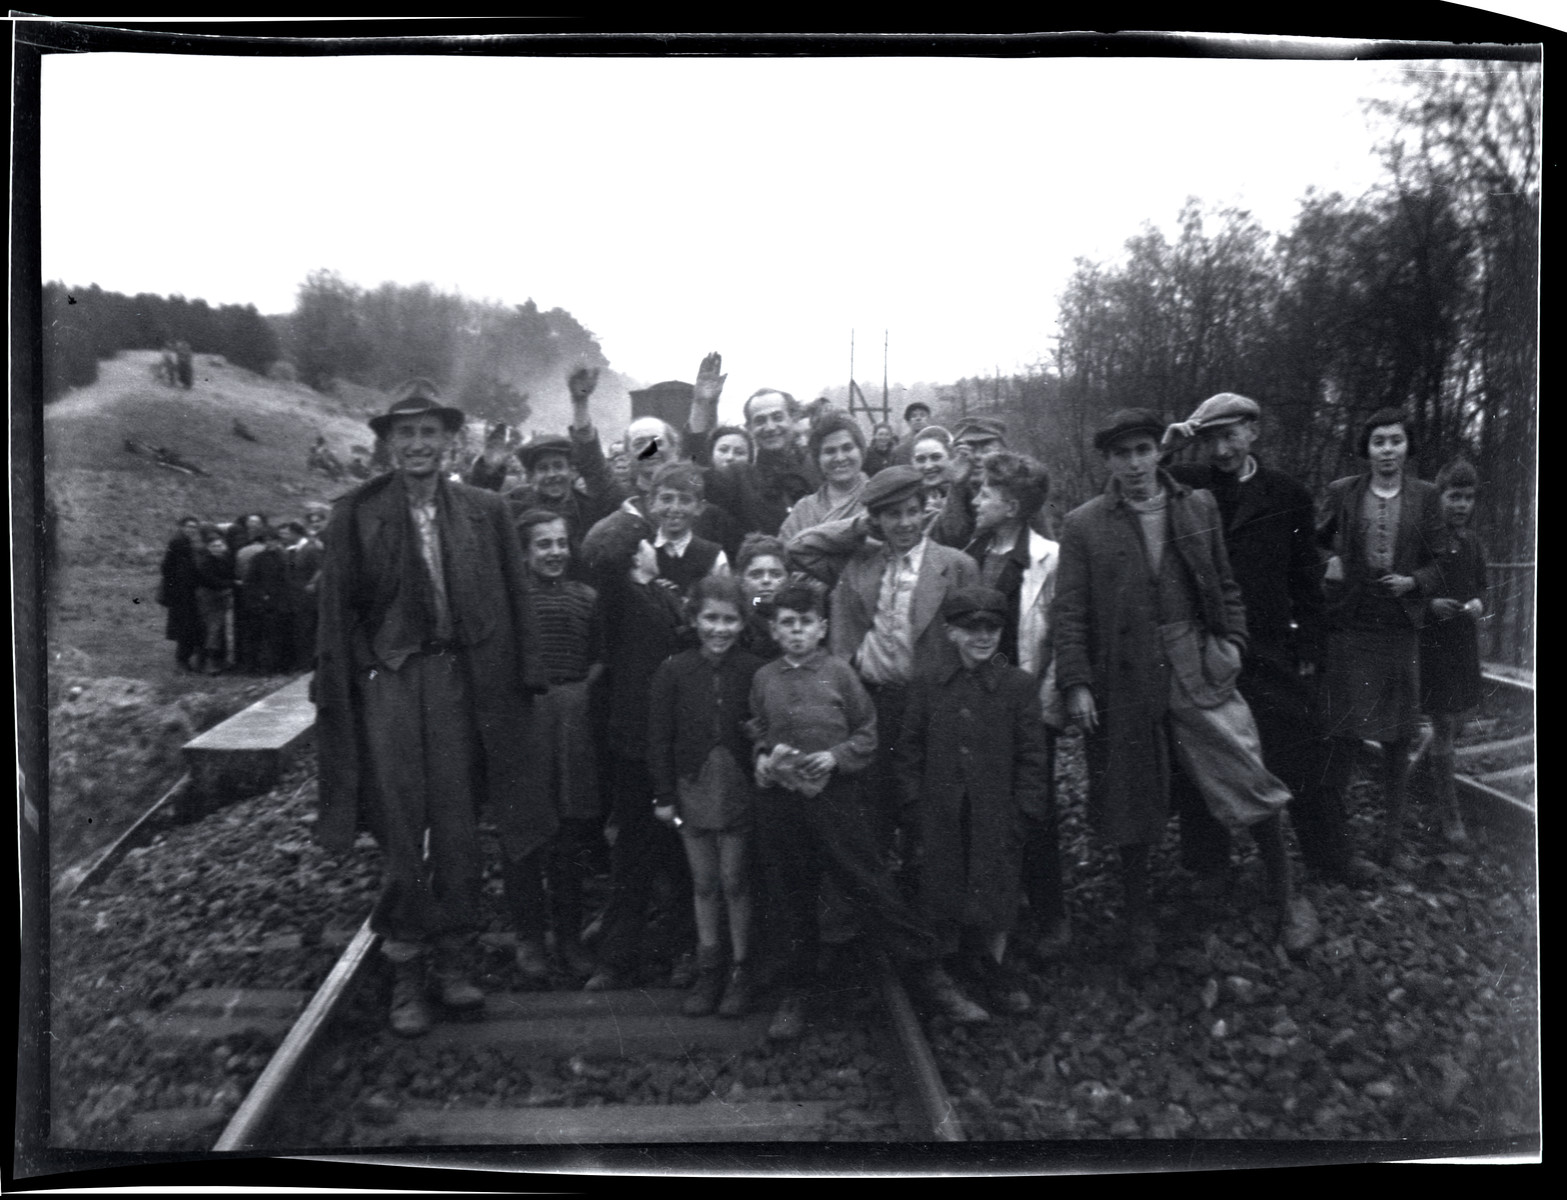 Survivors from Bergen-Belsen pose by the train tracks shortly after their liberation.